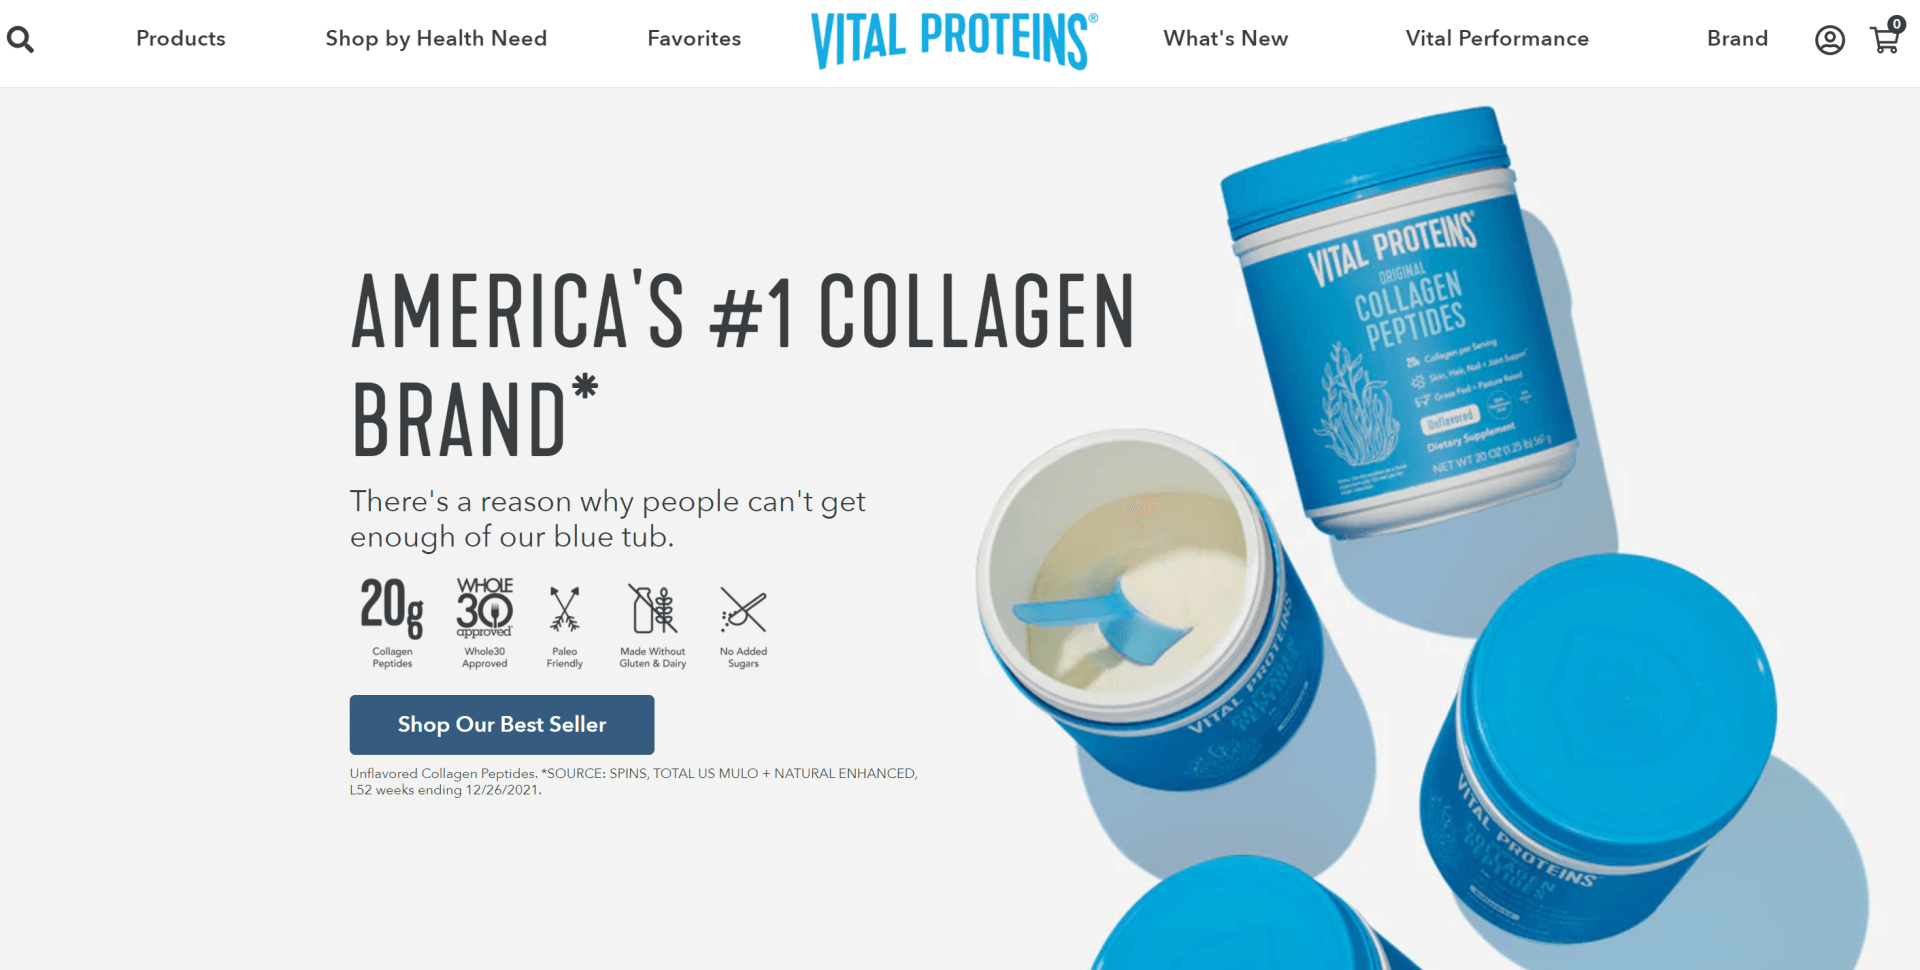 image showing webpage of Vital Proteins products